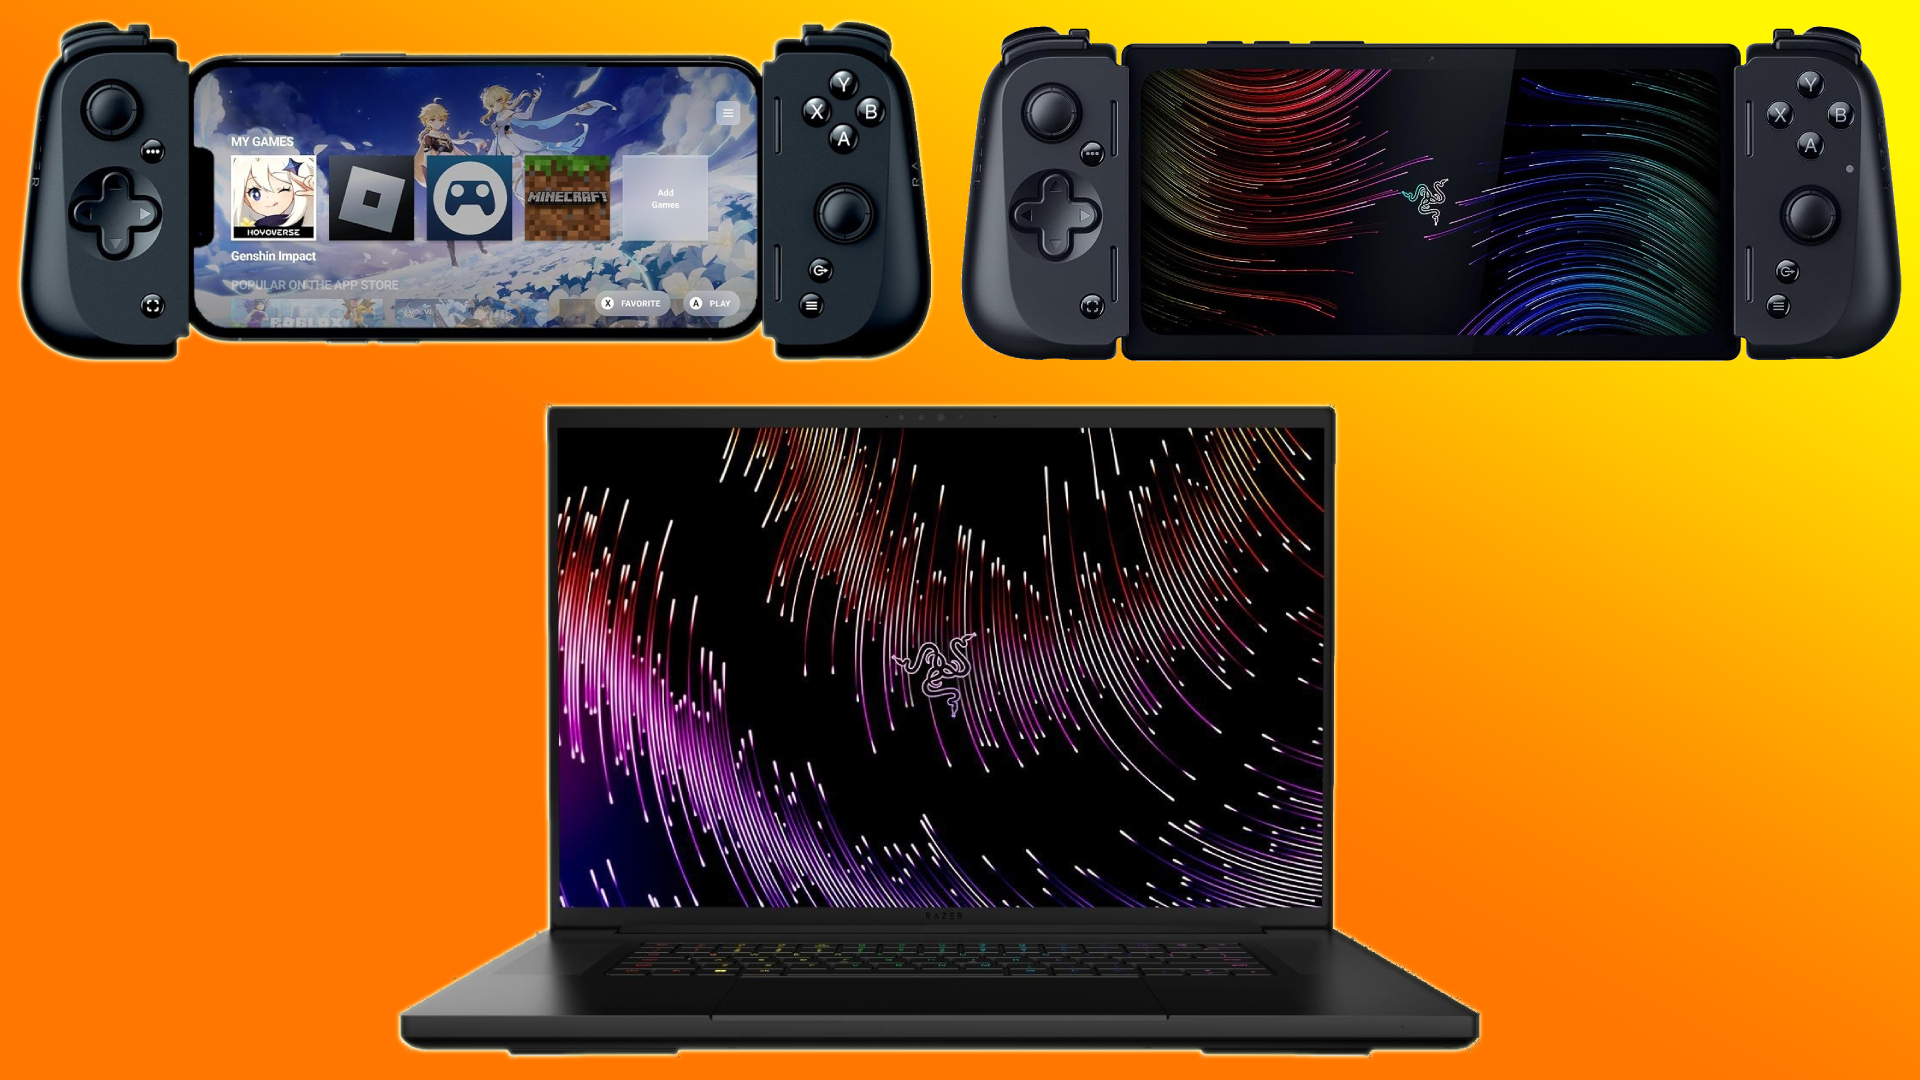 Save big on gaming on the go with this Razer Blade laptop bundle